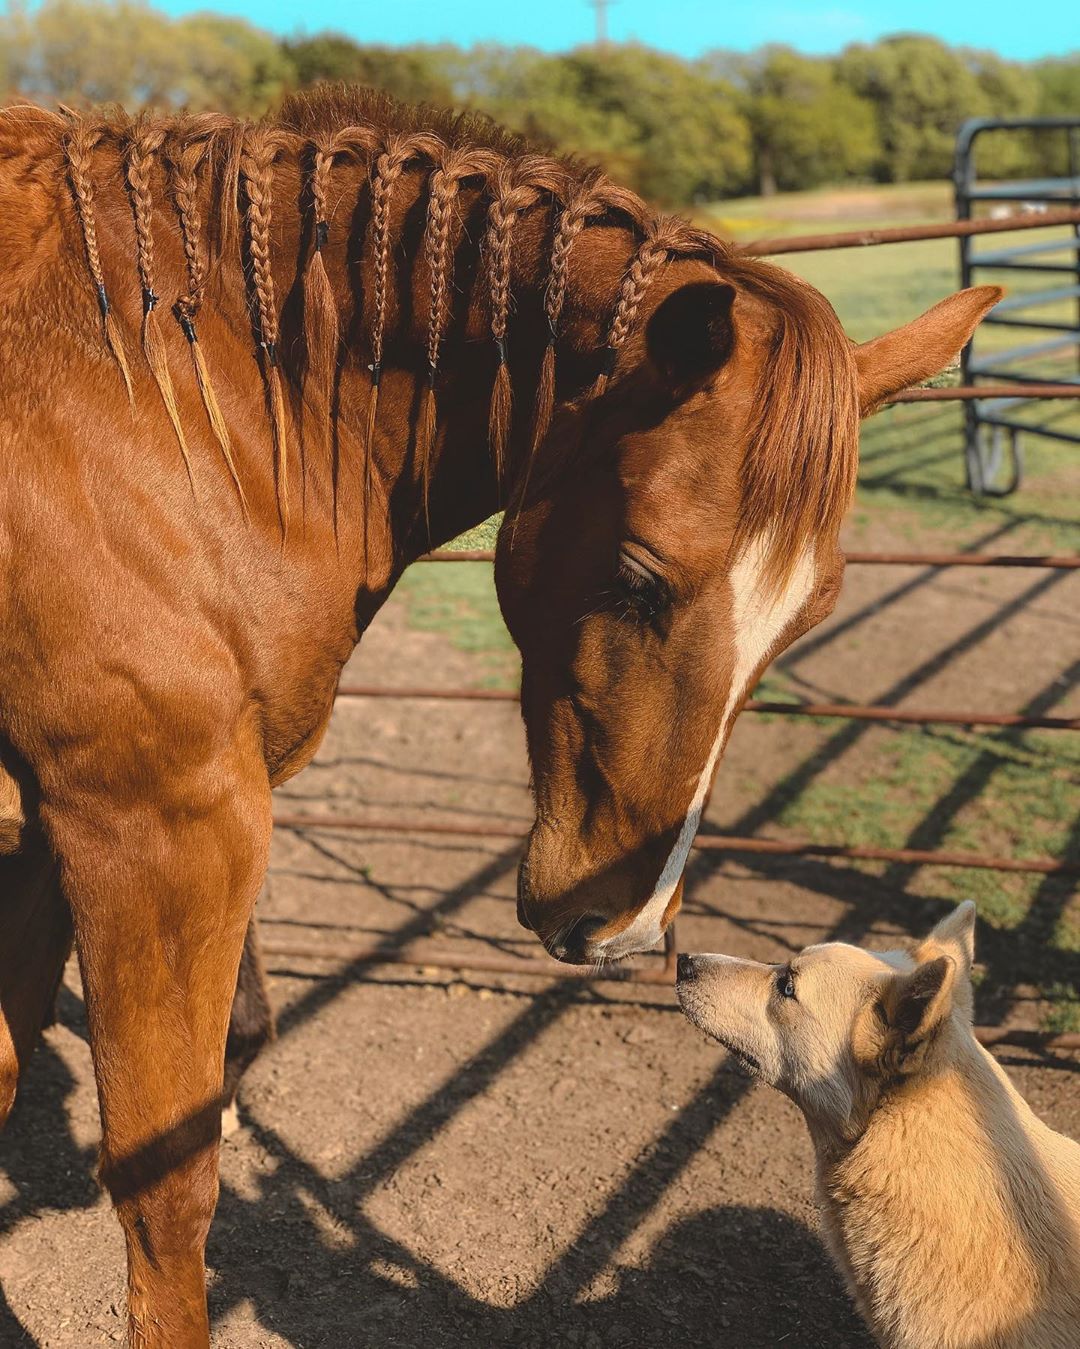 brown horse with braids sniffing a dog